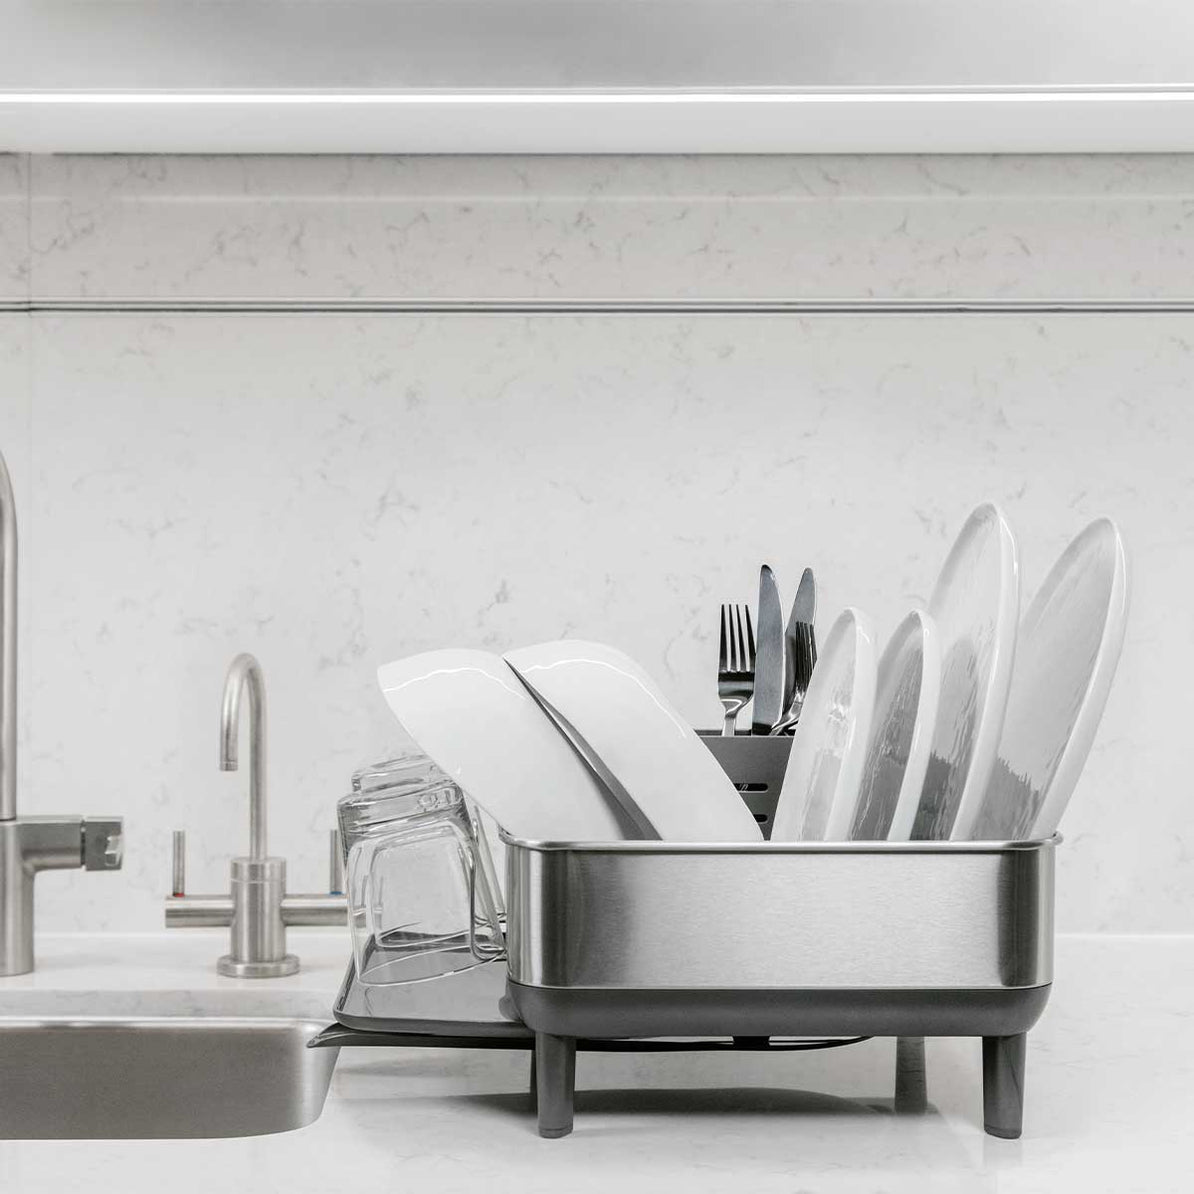 SIMPLEHUMAN COMPACT DISHRACK GREY STAINLESS STEEL